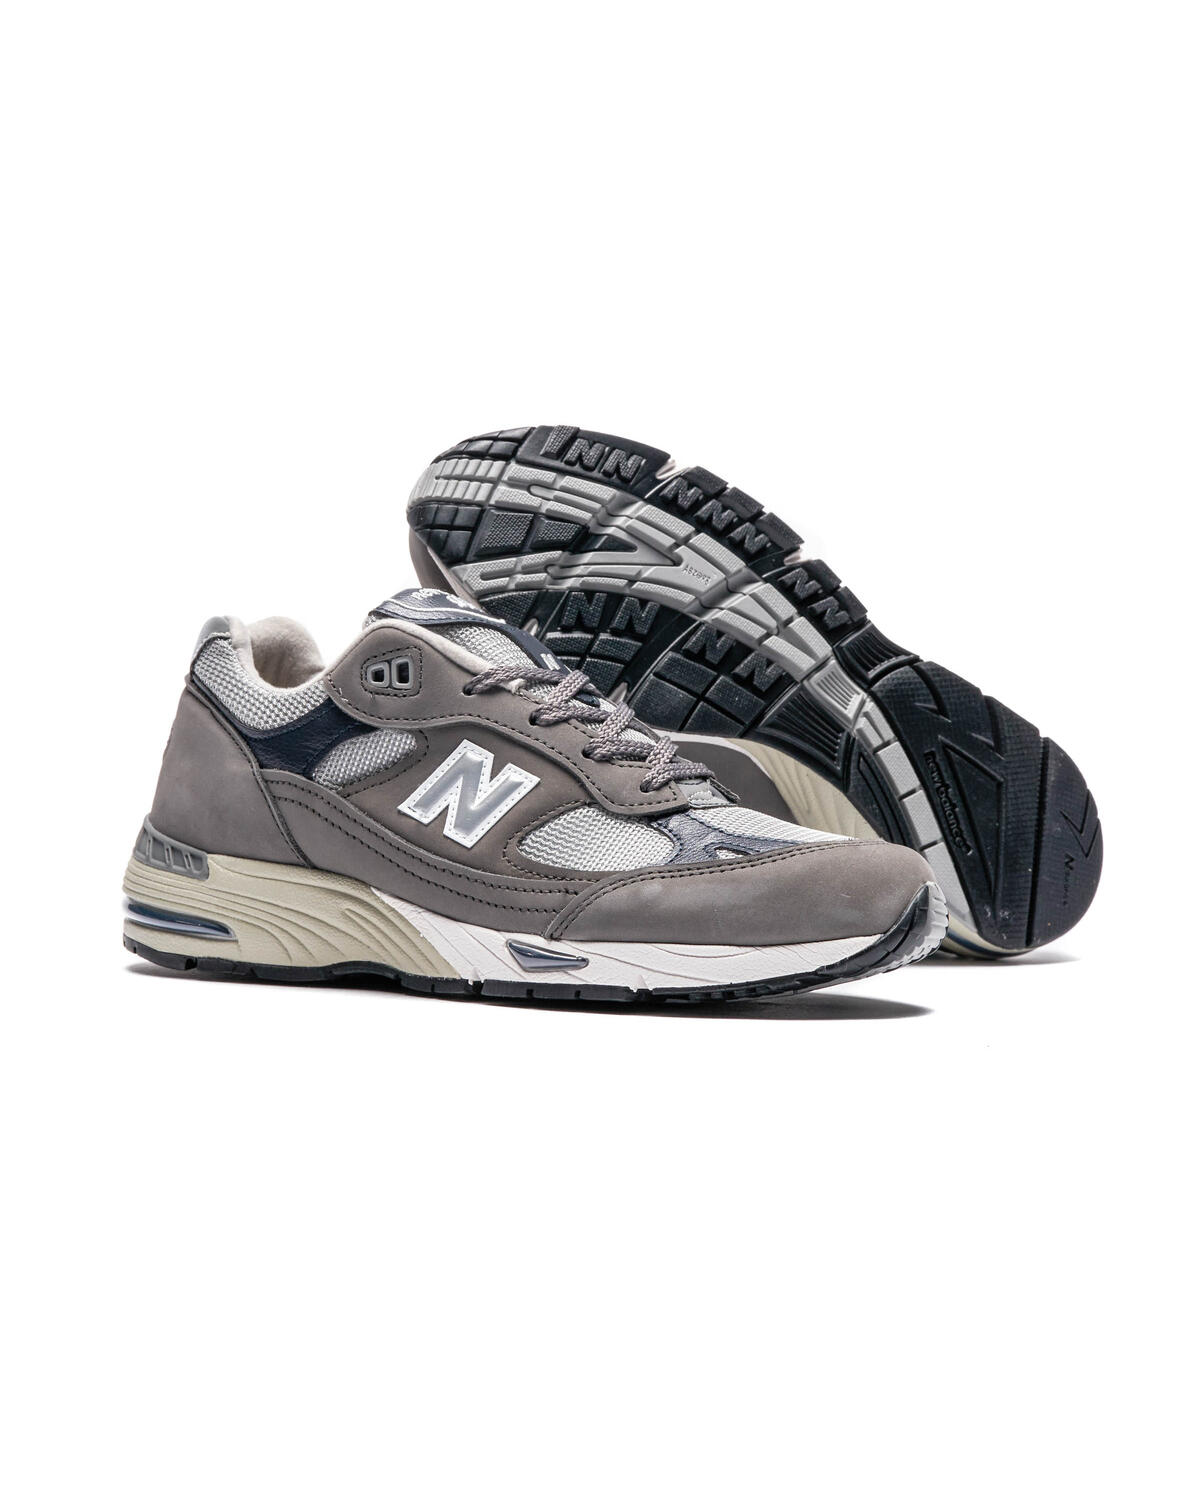 New Balance WMNS 991 GNS - Made in England | W991GNS